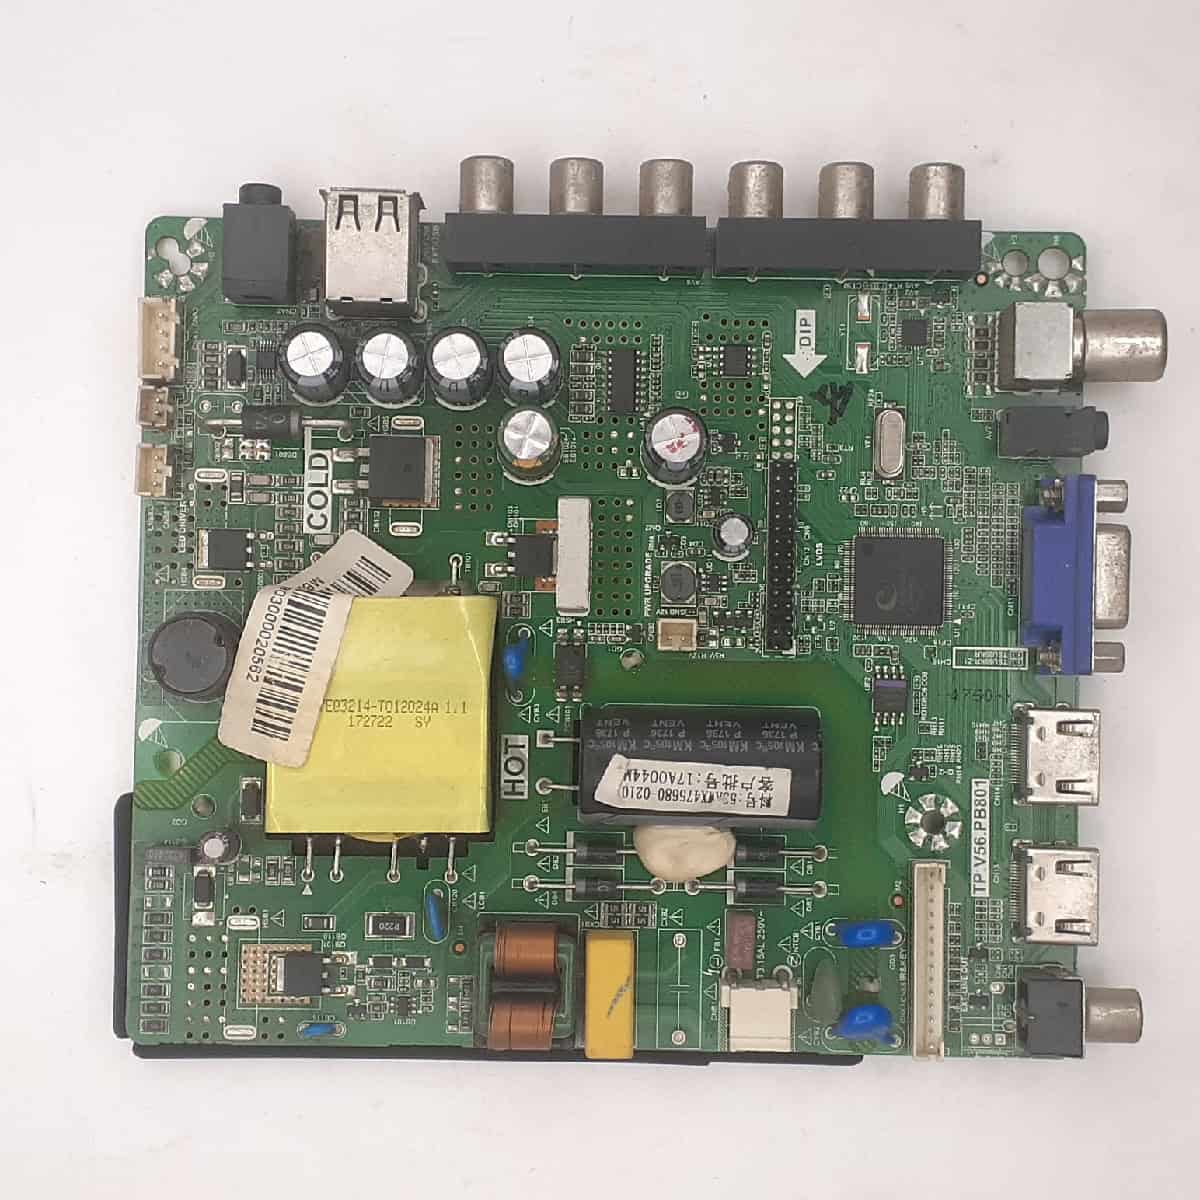 TH-39E2000DX PANASONIC MOTHERBOARD FOR LED TV